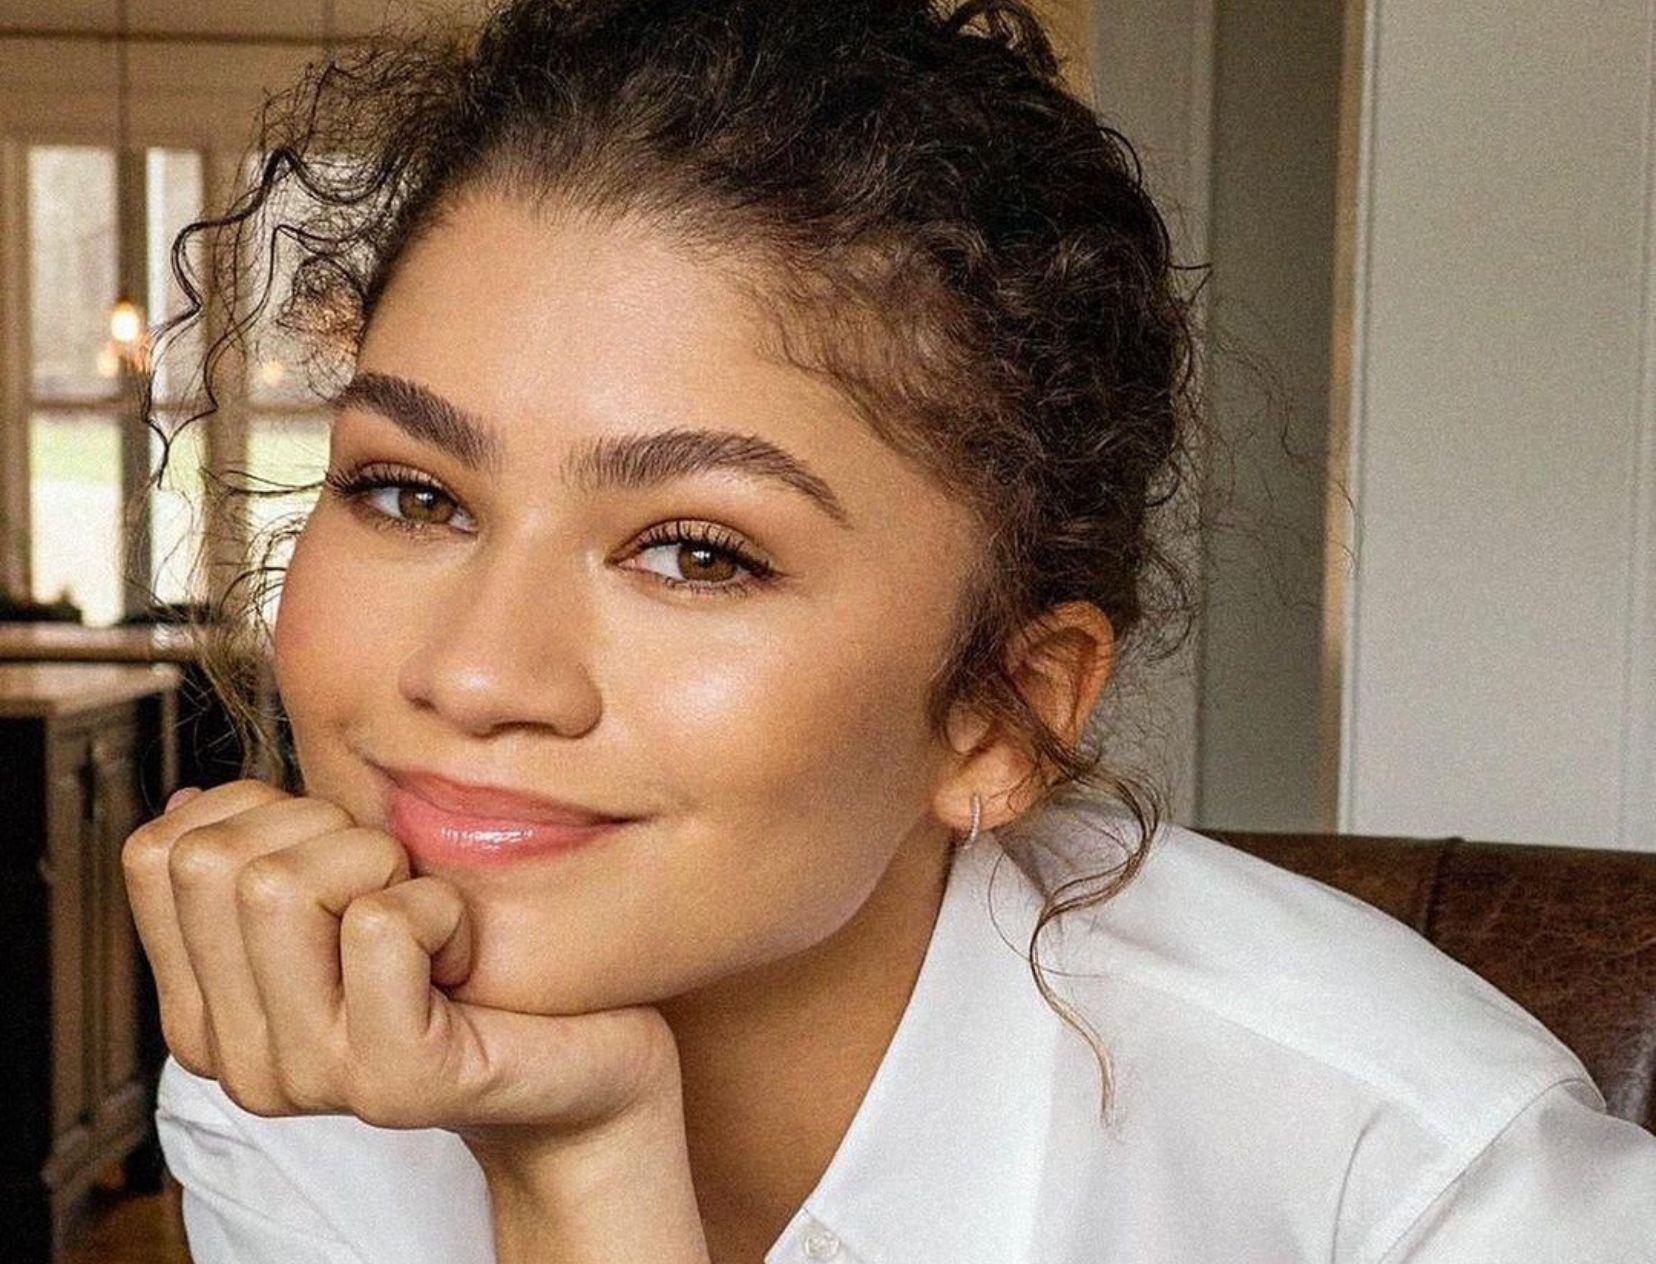 Love Selfies? Try Zendaya’s Hack For Glowing Skin Before Your Next Photo Sesh